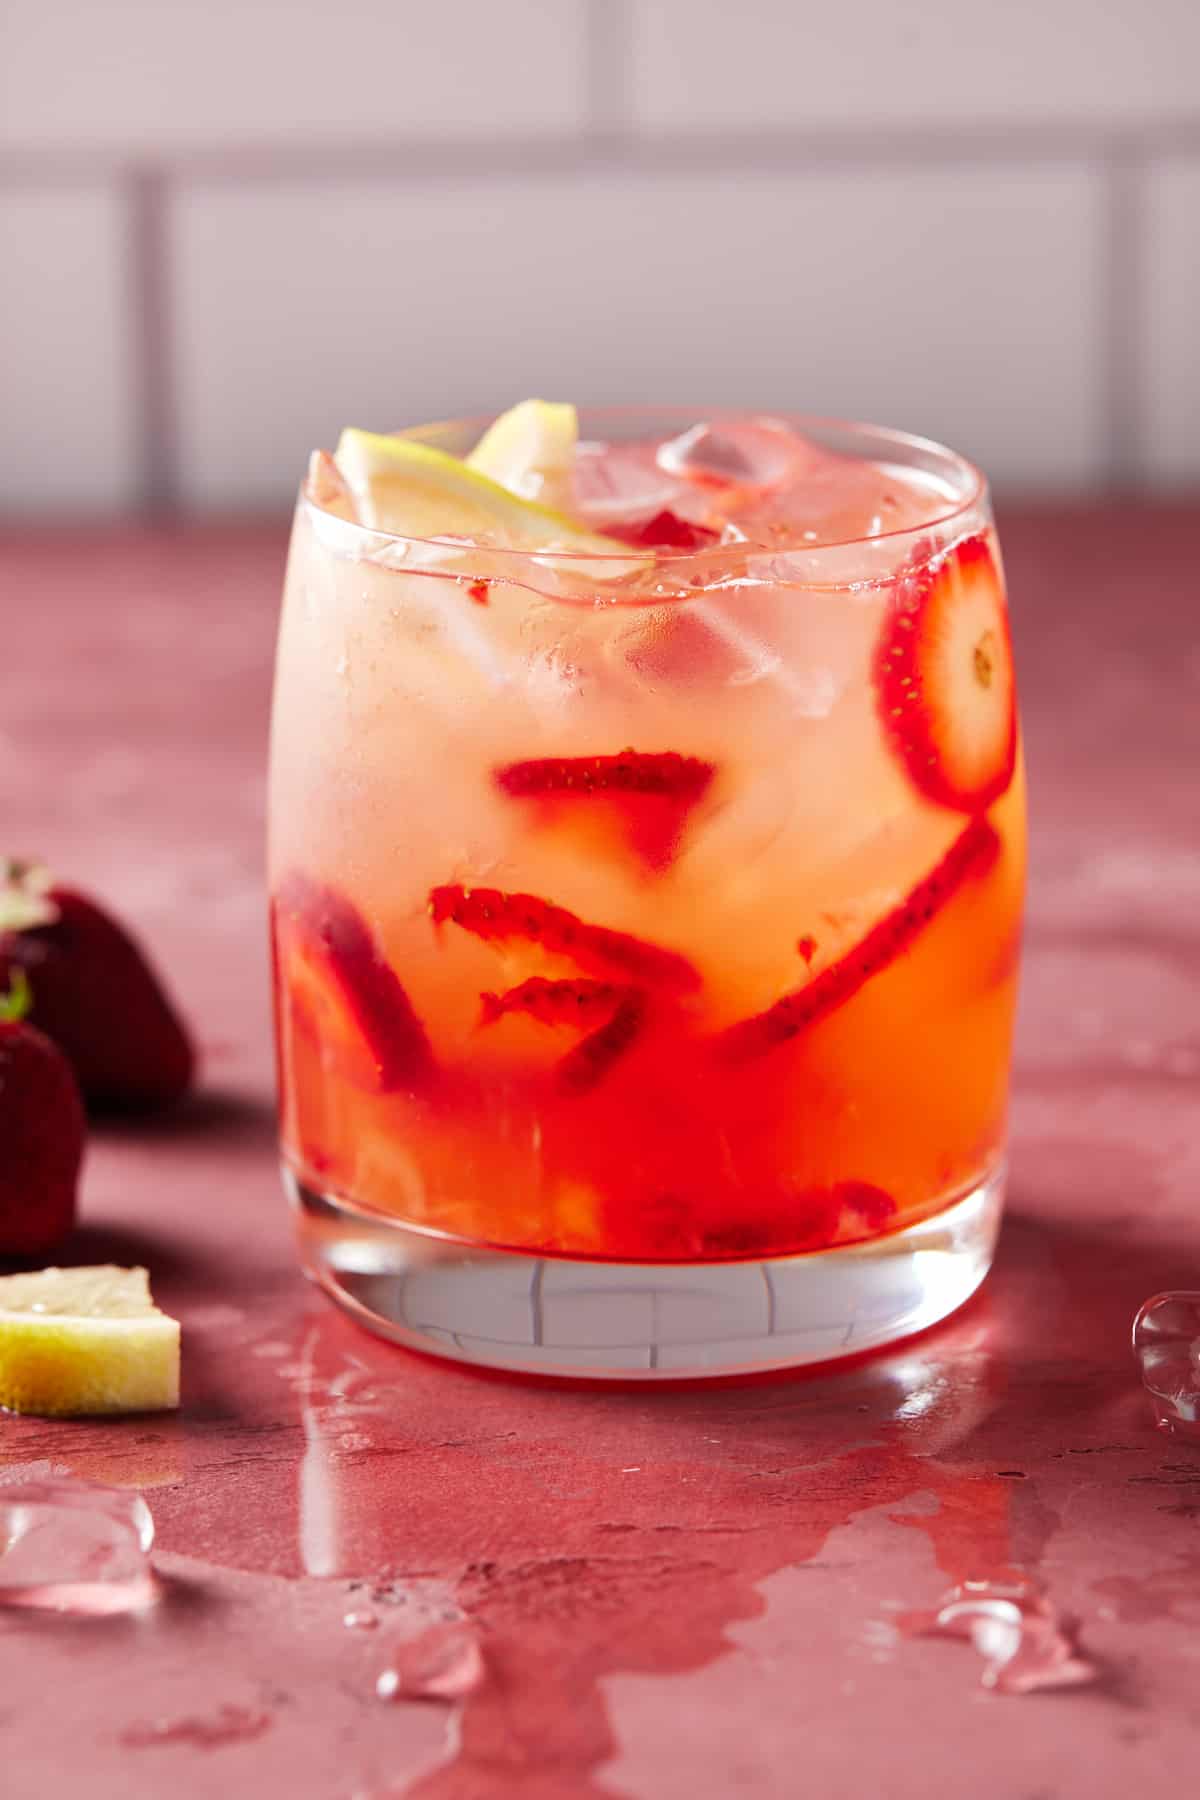 Lowball glass filled with strawberry vodka lemonade, strawberry slices and ice on a pink board.